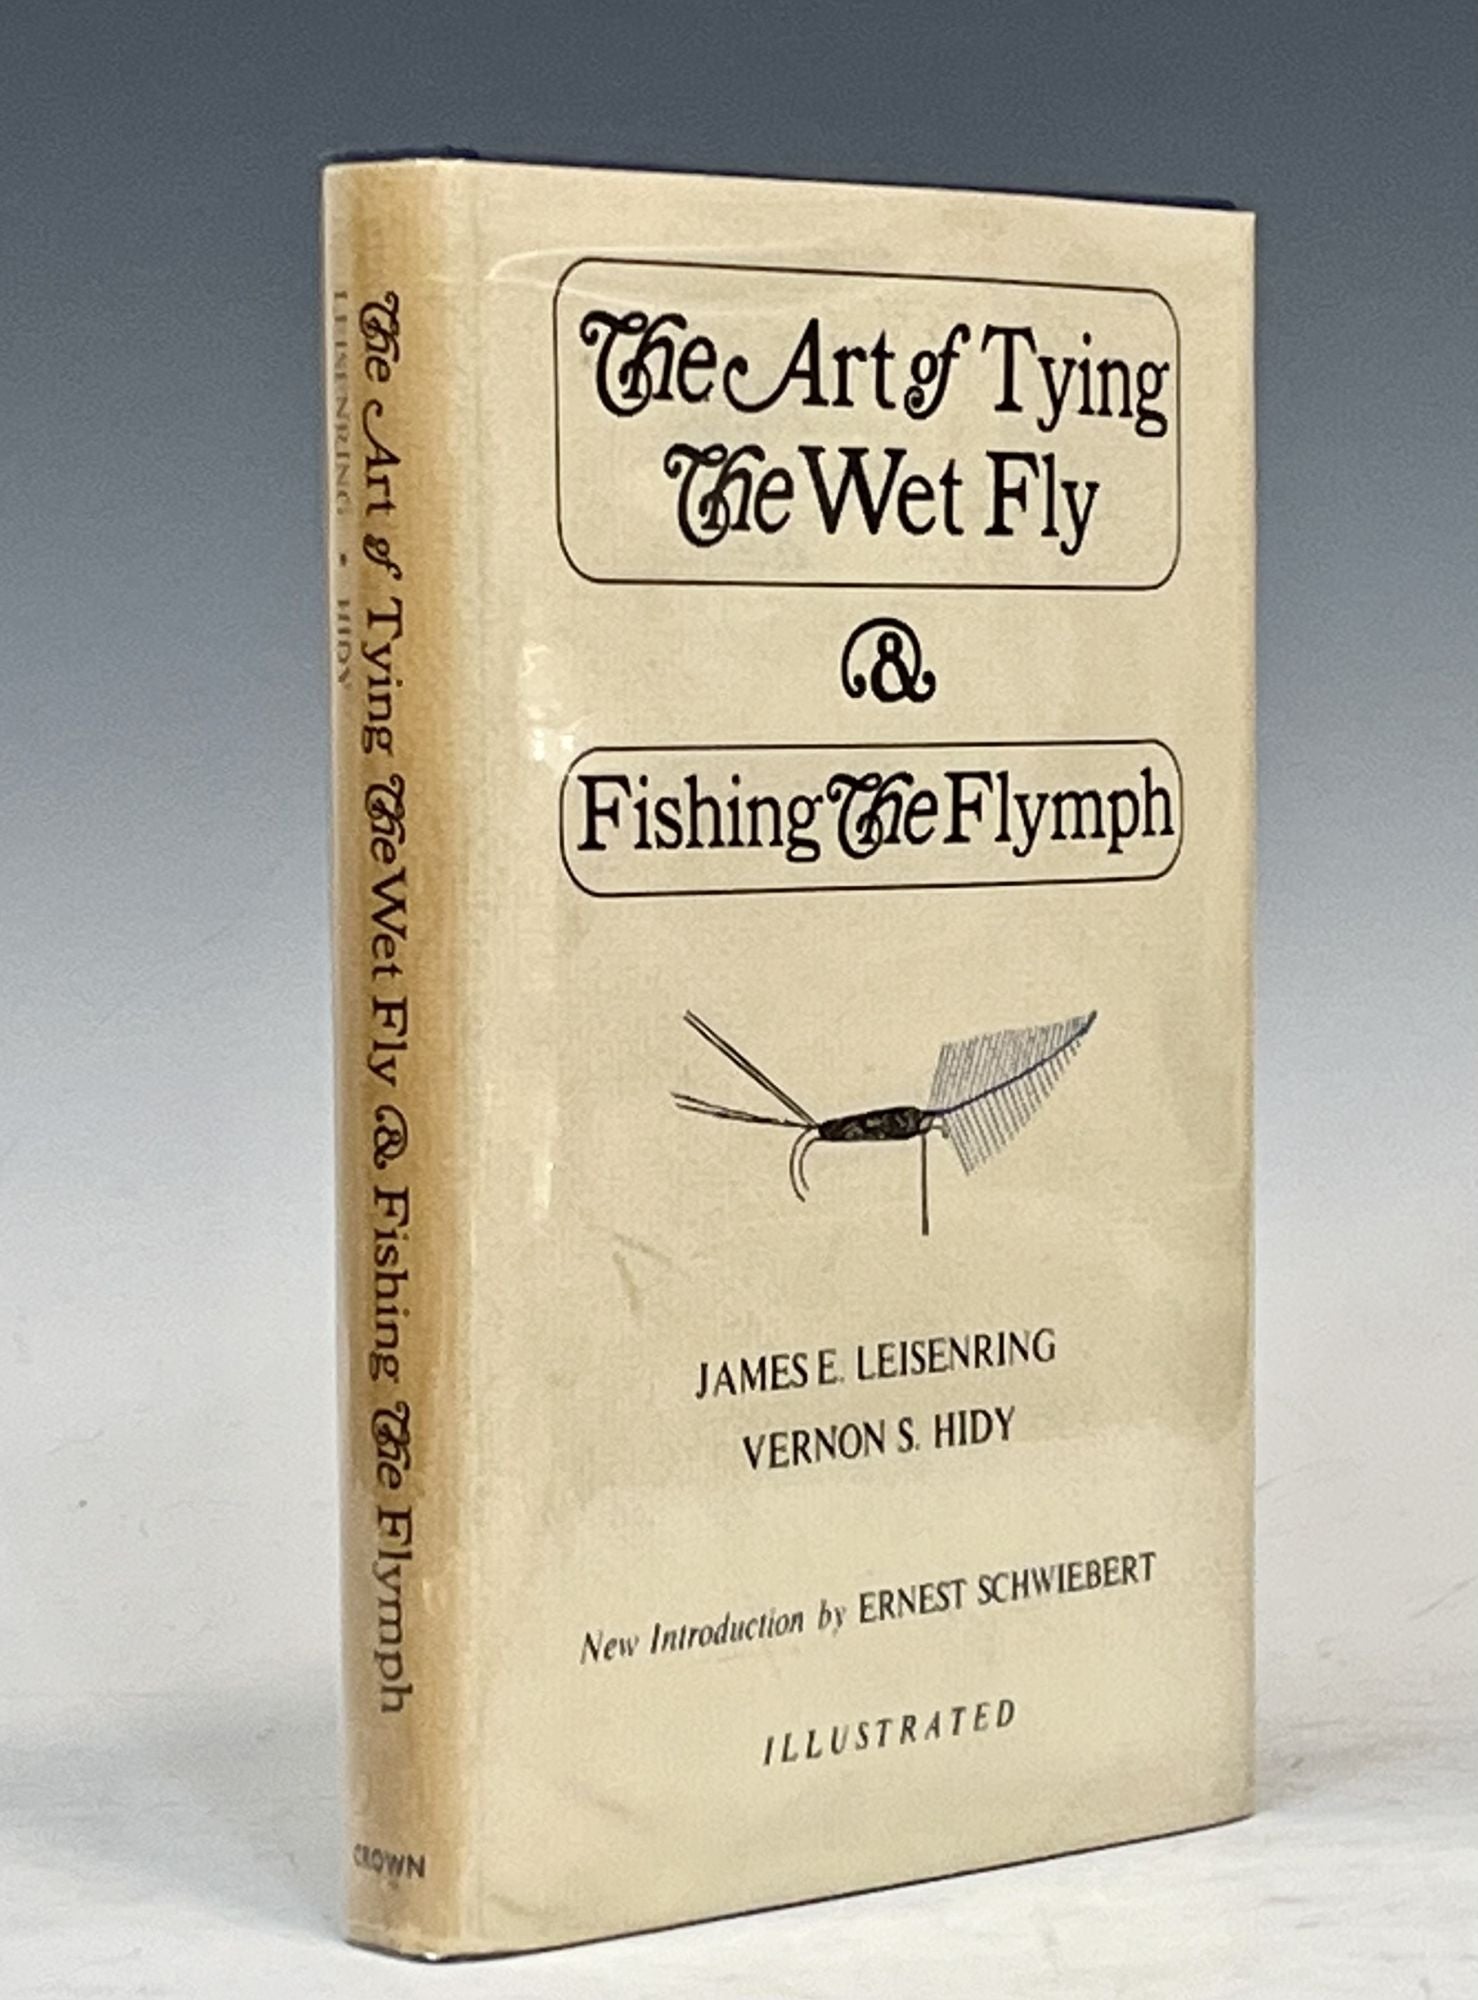 The Art of Tying the Wet Fly & Fishing the Flymph